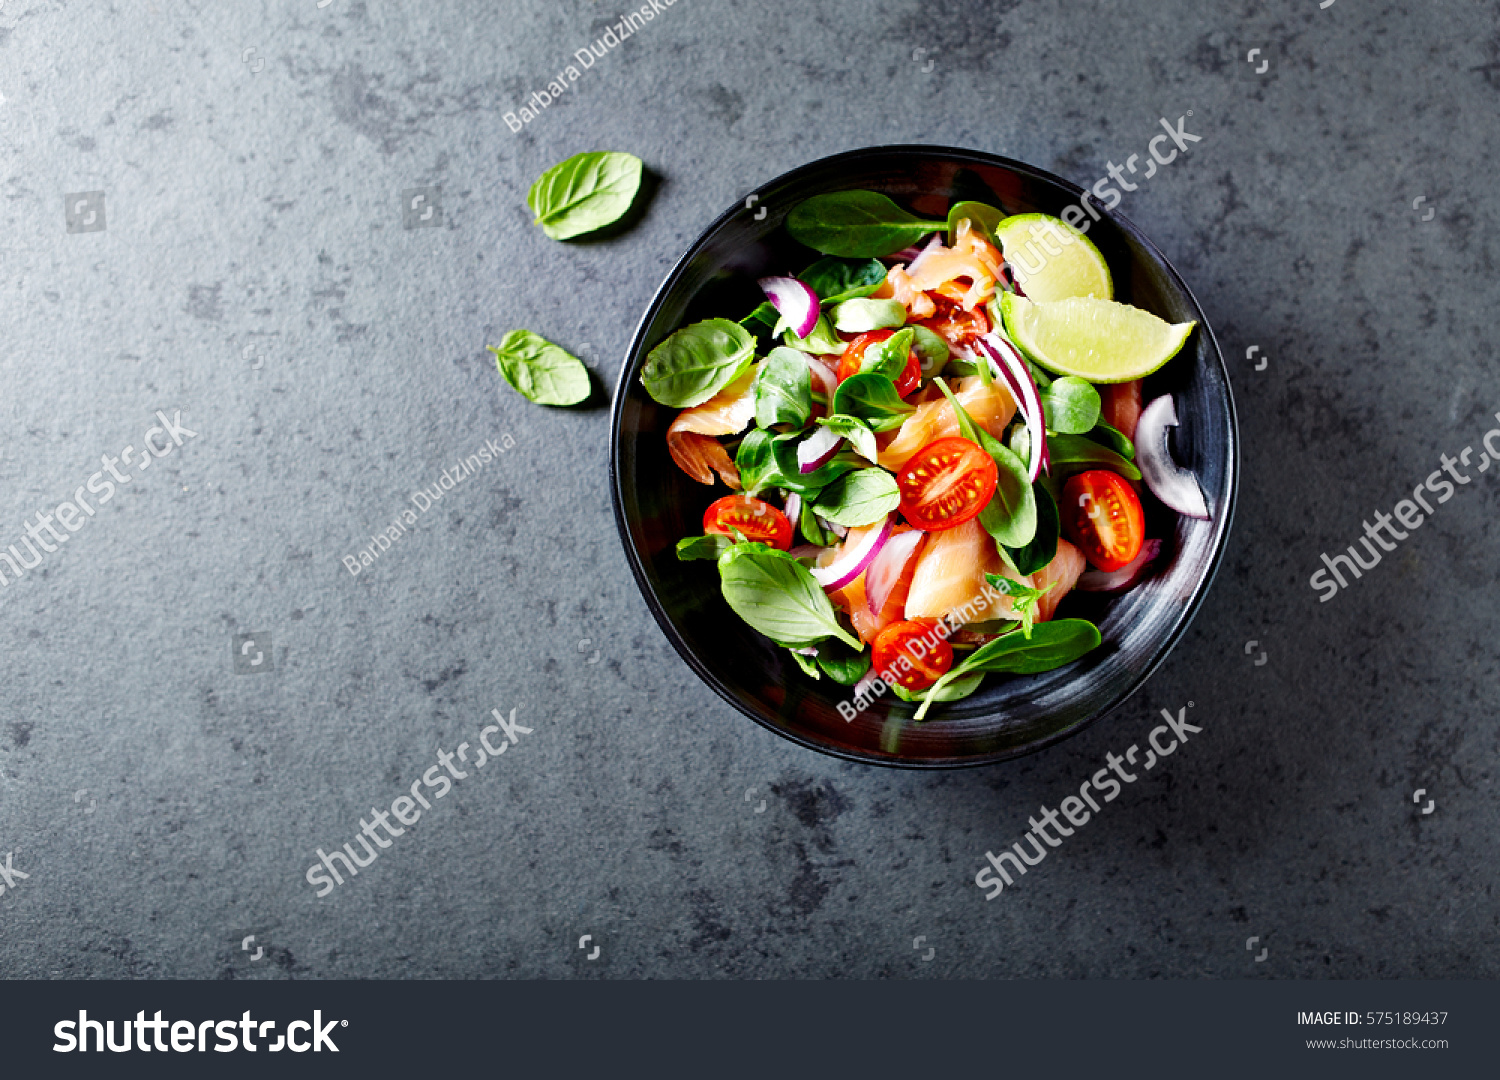 Salmon Salad with spinach, cherry tomatoes, corn salad, baby spinach, fresh mint and basil. Home made food. Concept for a tasty and healthy meal. Dark stone background. Top view. Copy space. #575189437